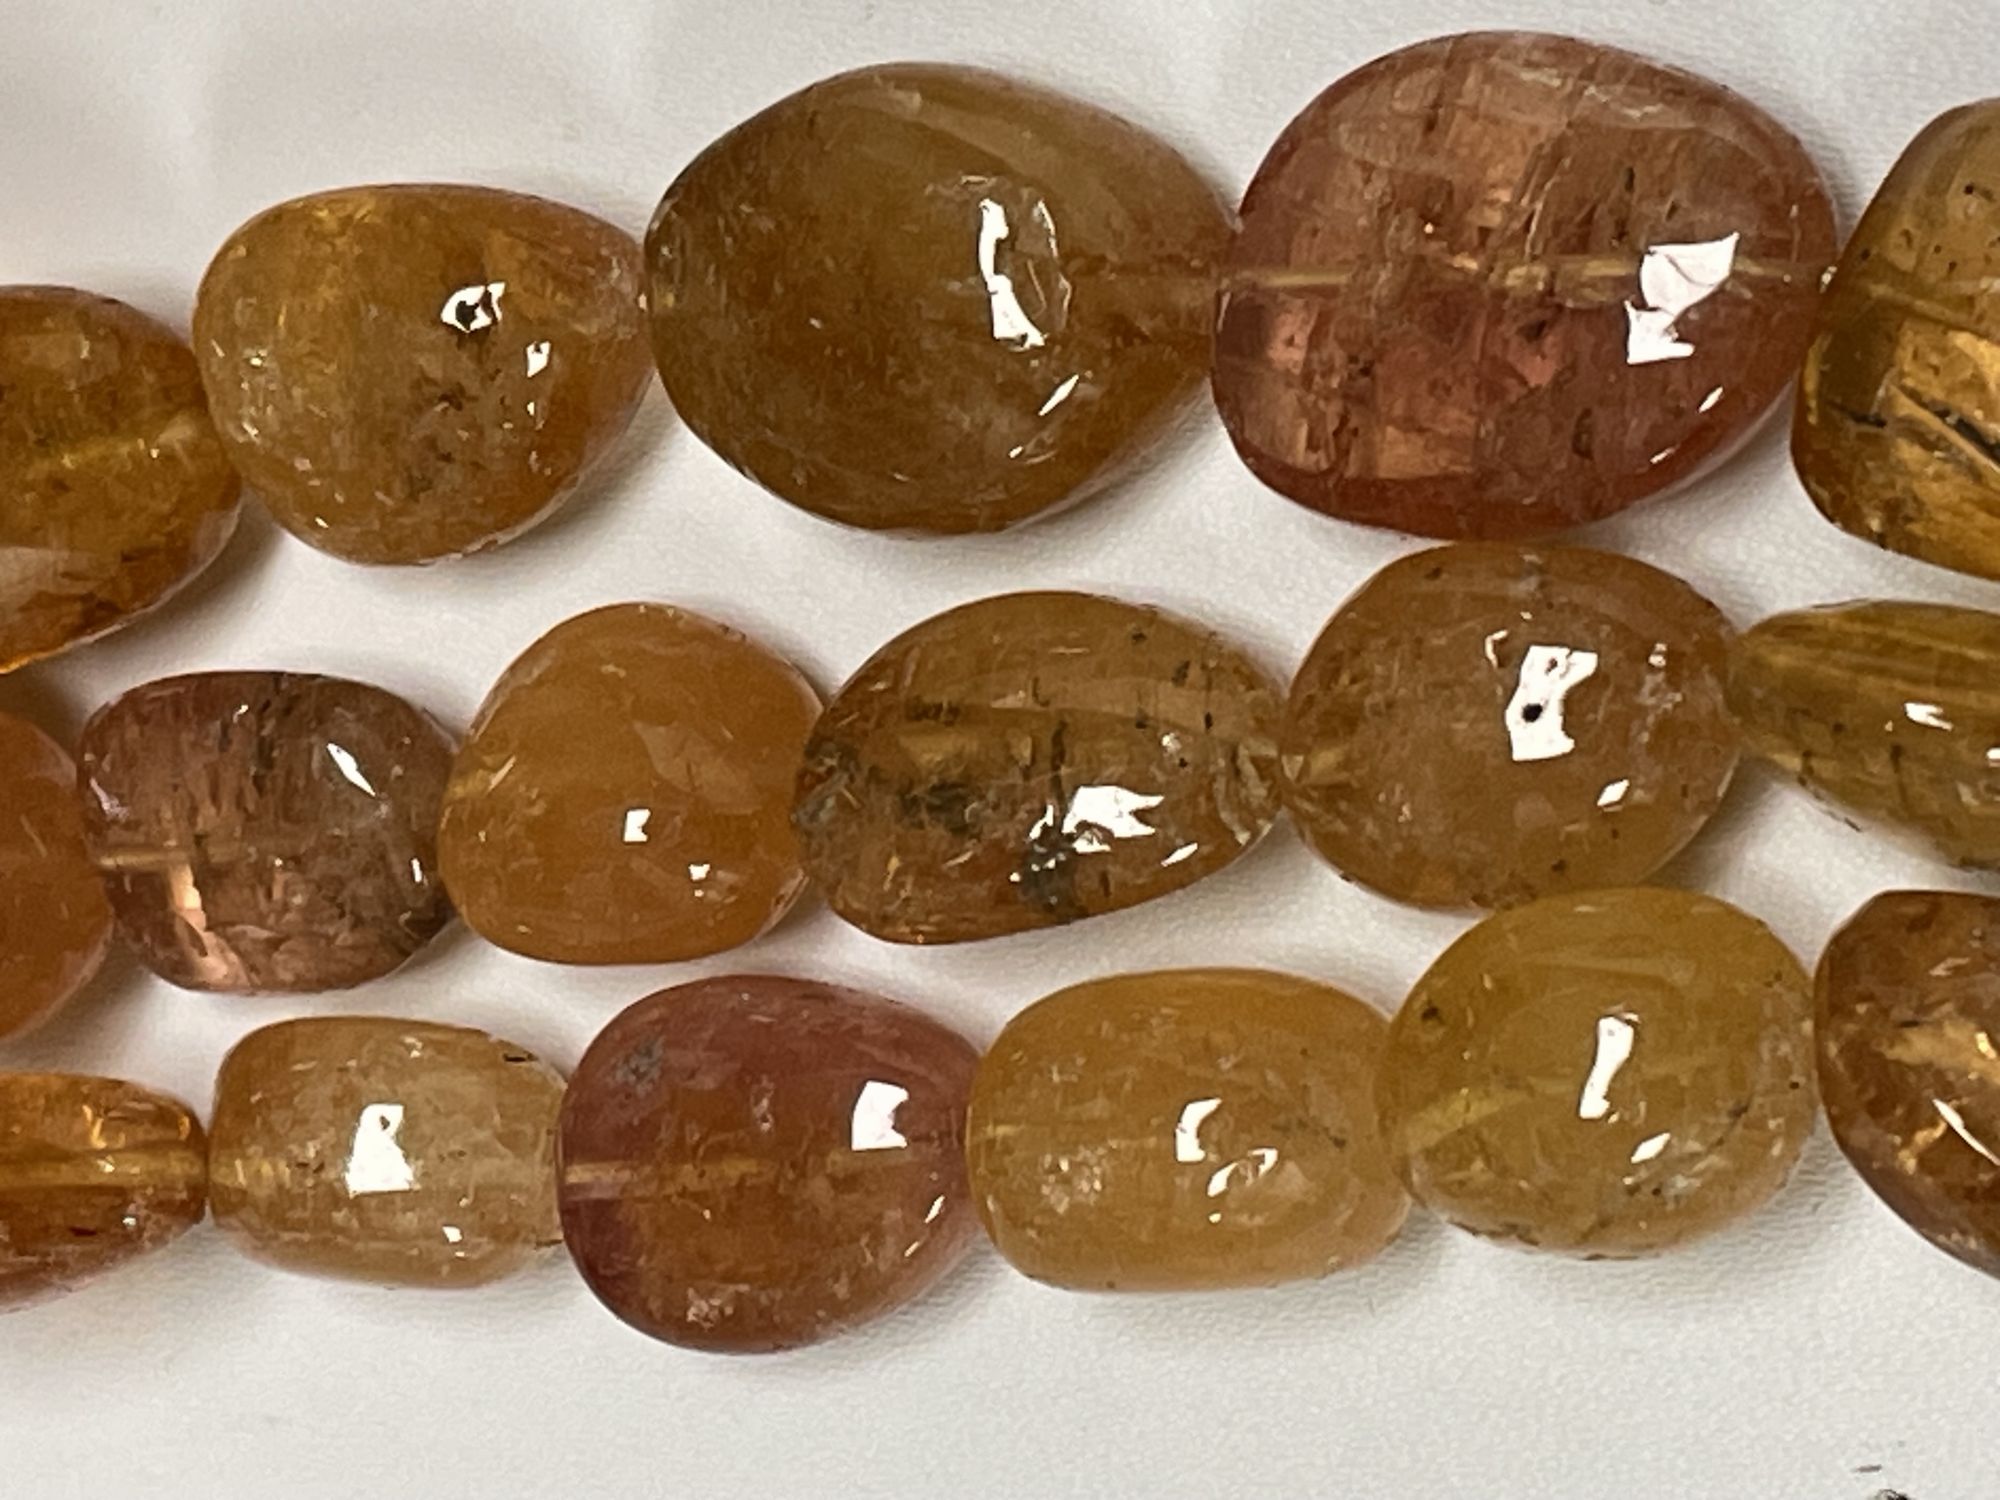 Imperial Topaz Nugget Smooth